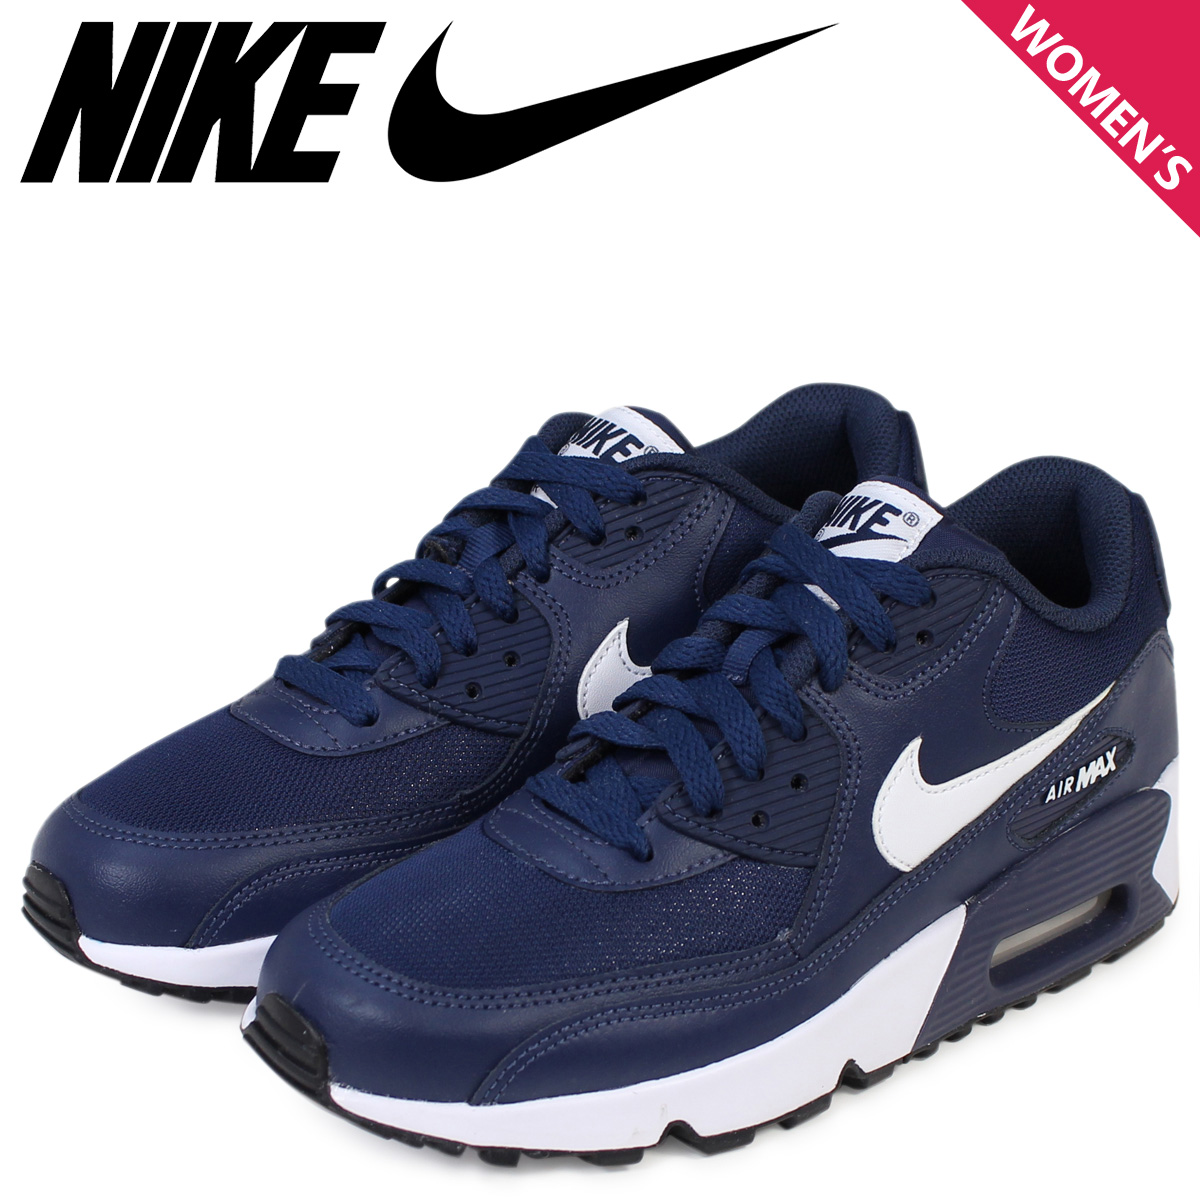 nike navy blue shoes womens